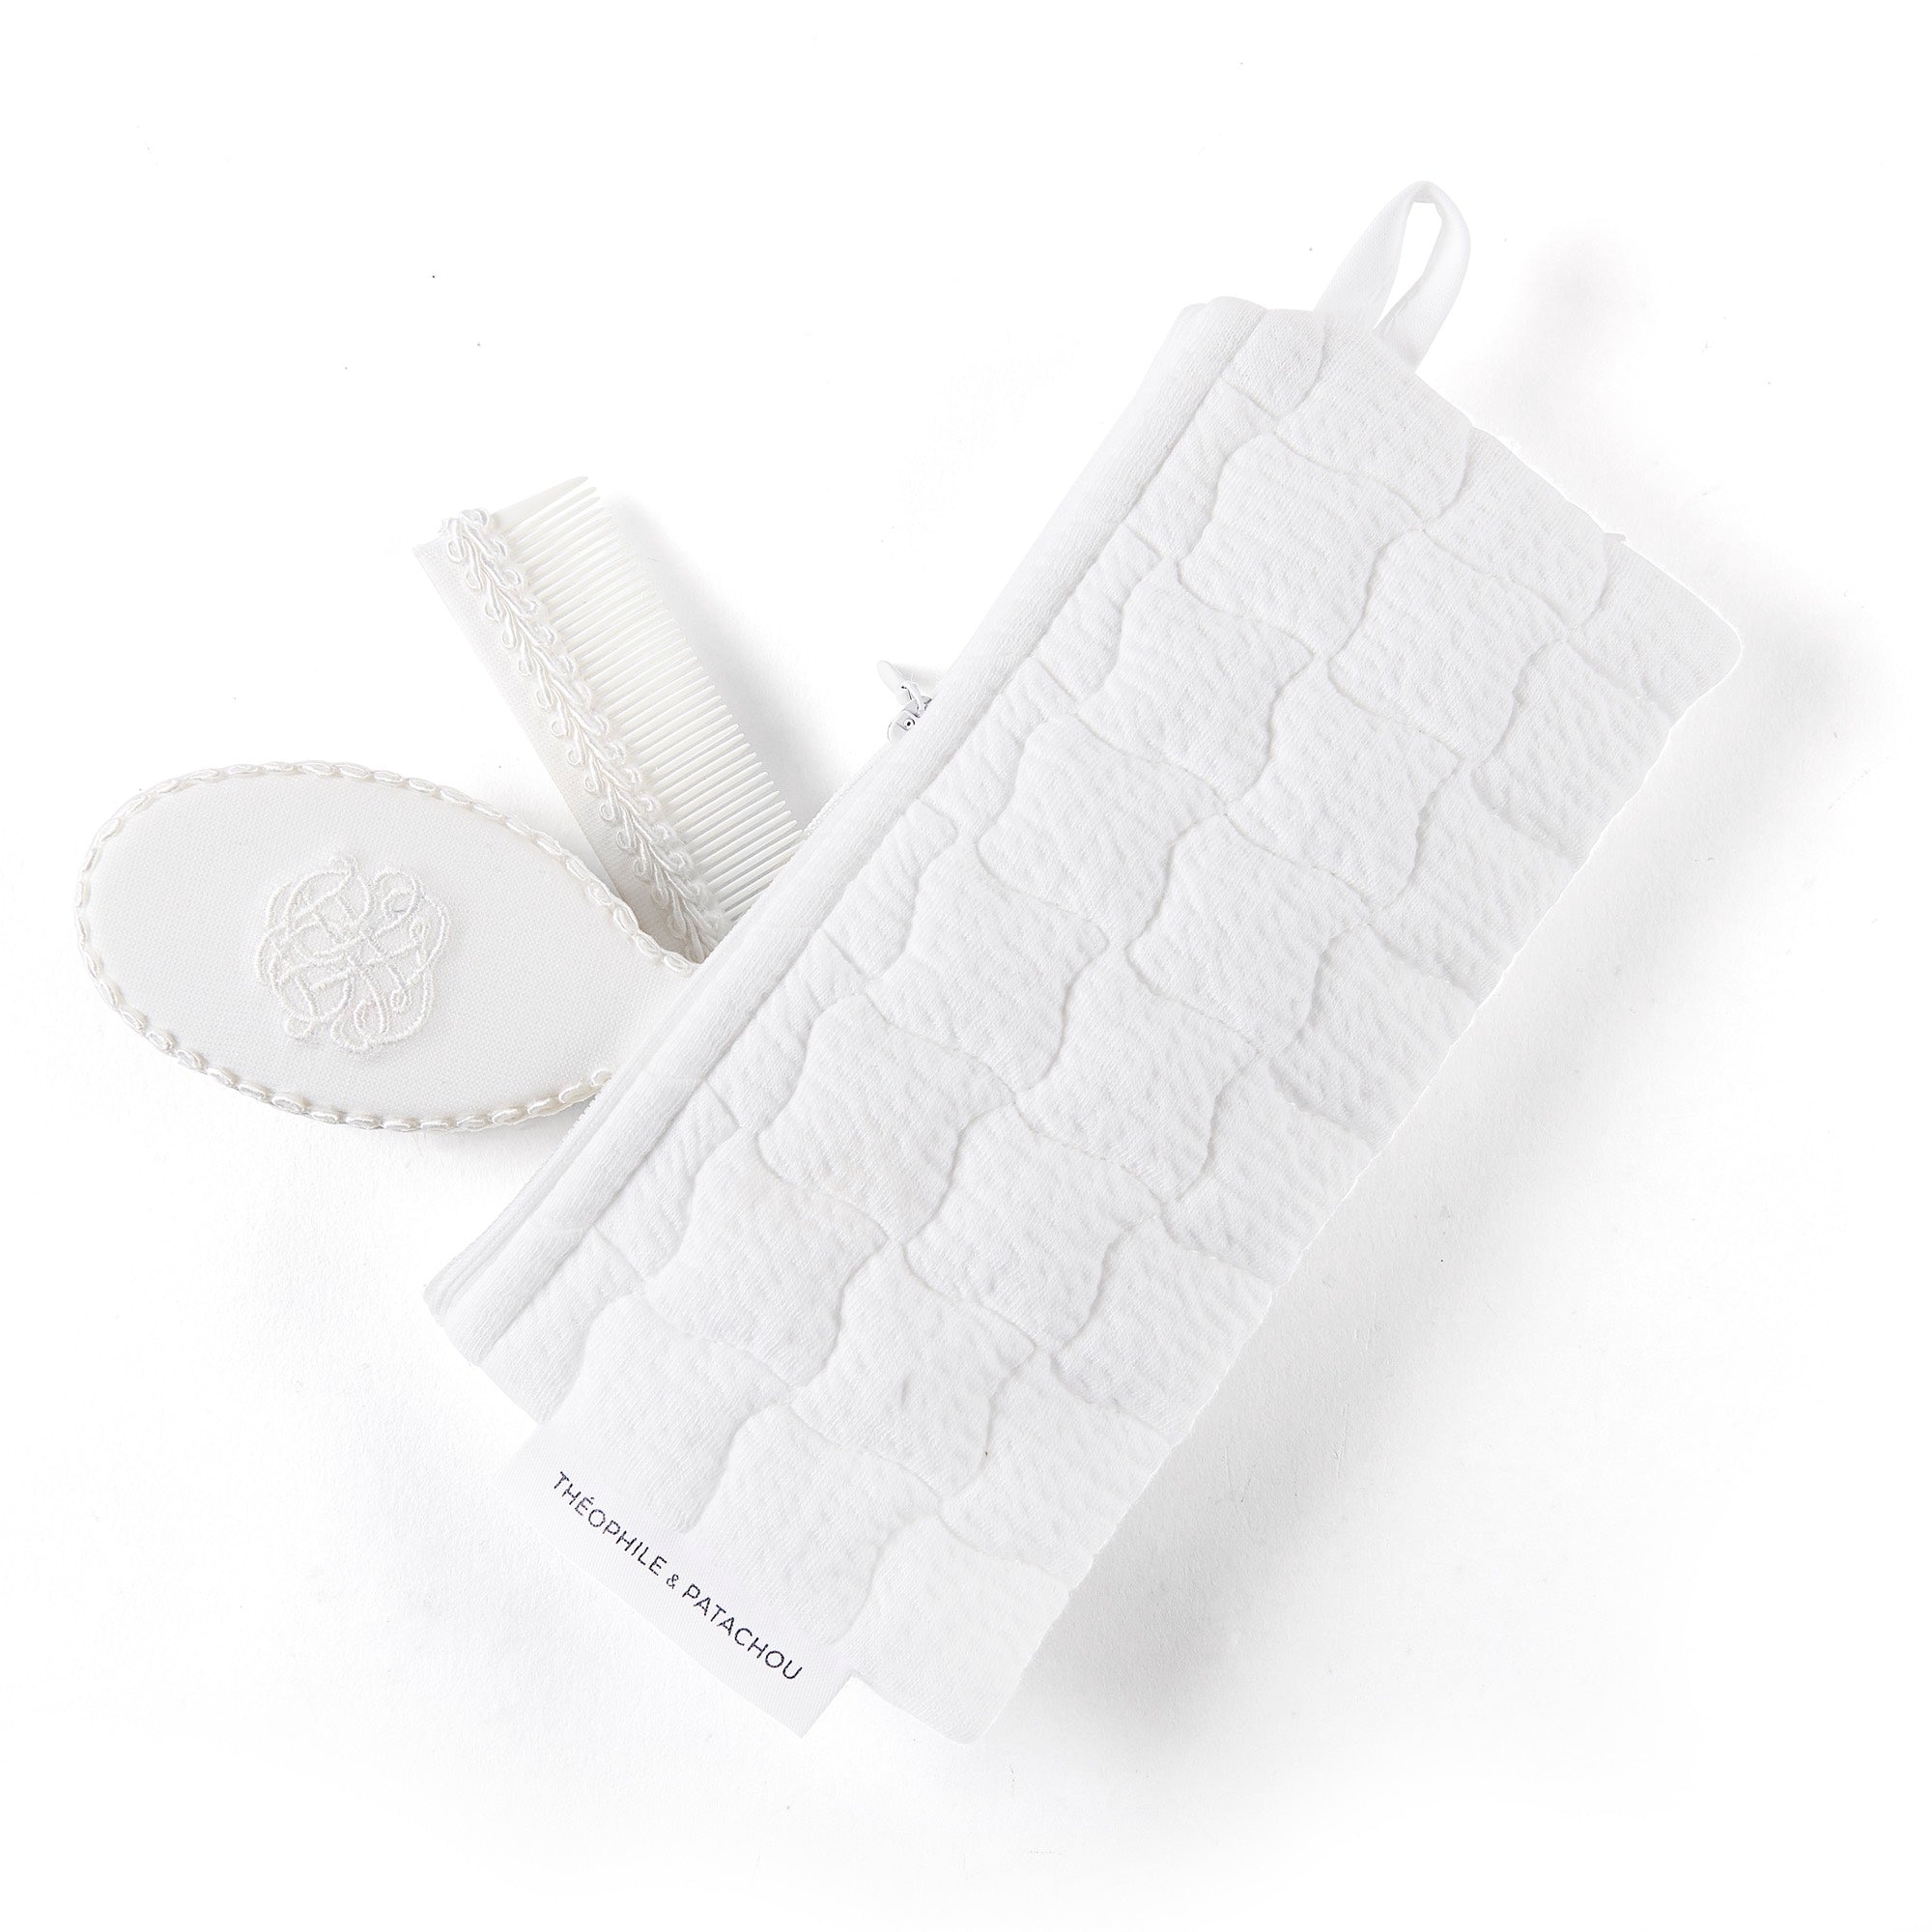 Theophile & Patachou Baby Brush and Comb - Cotton White